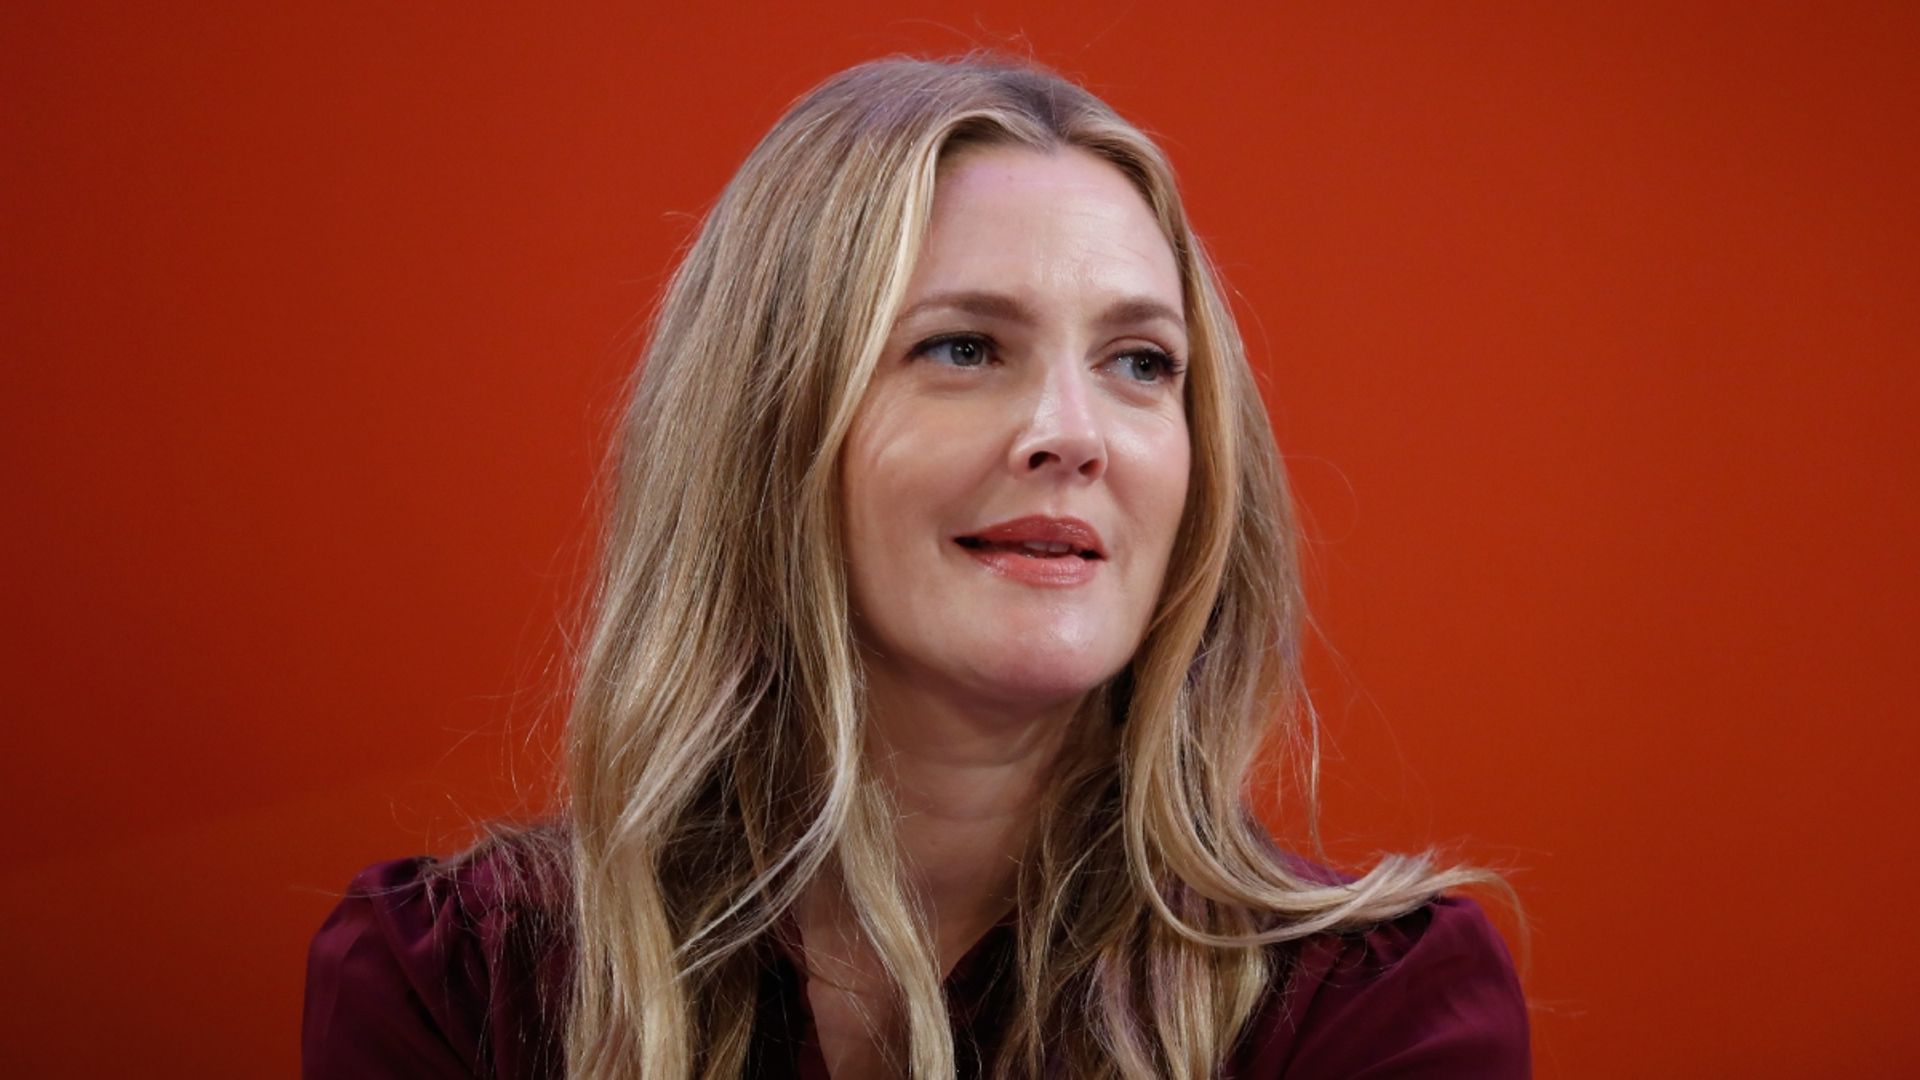 Drew Barrymore emotionally opens up about dating life as fans send love